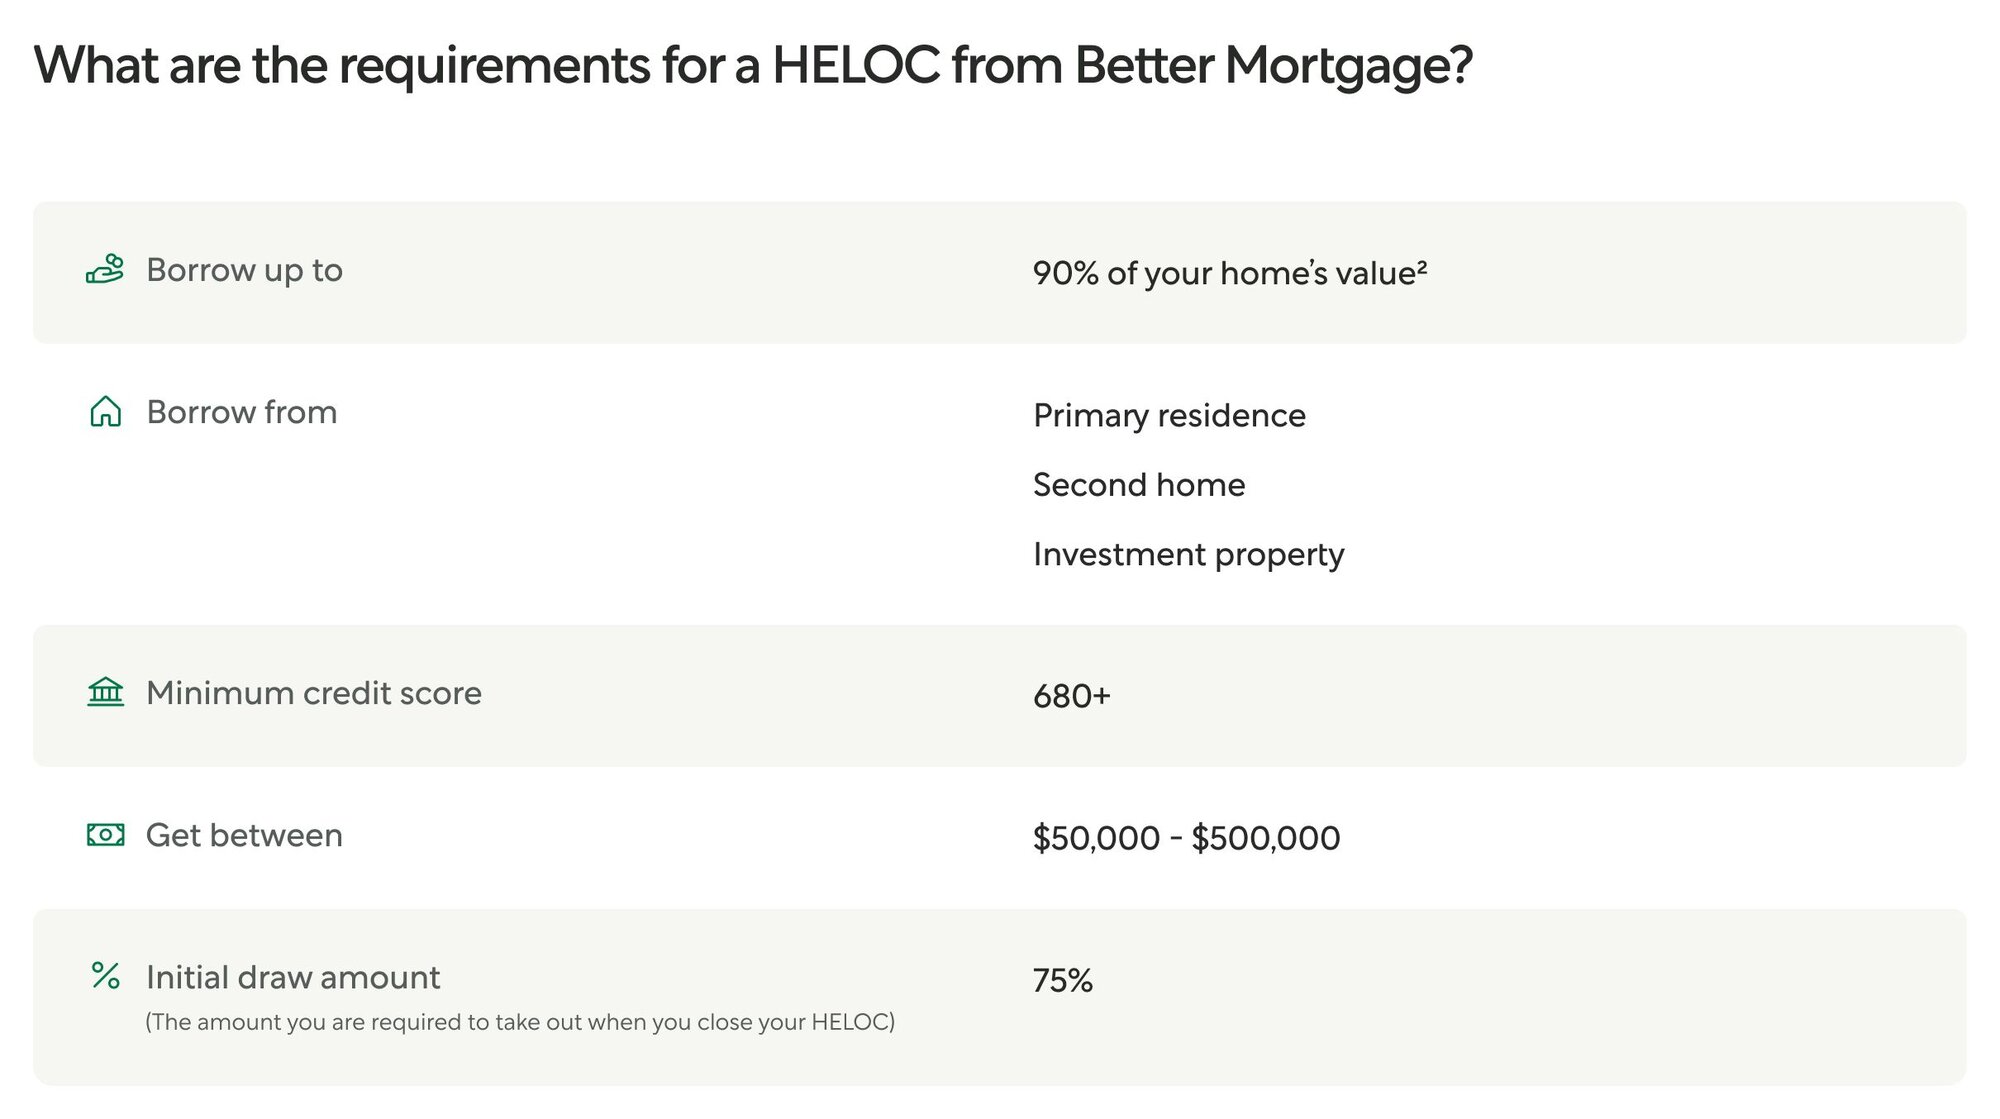 HELOC requirements from Better Mortgage